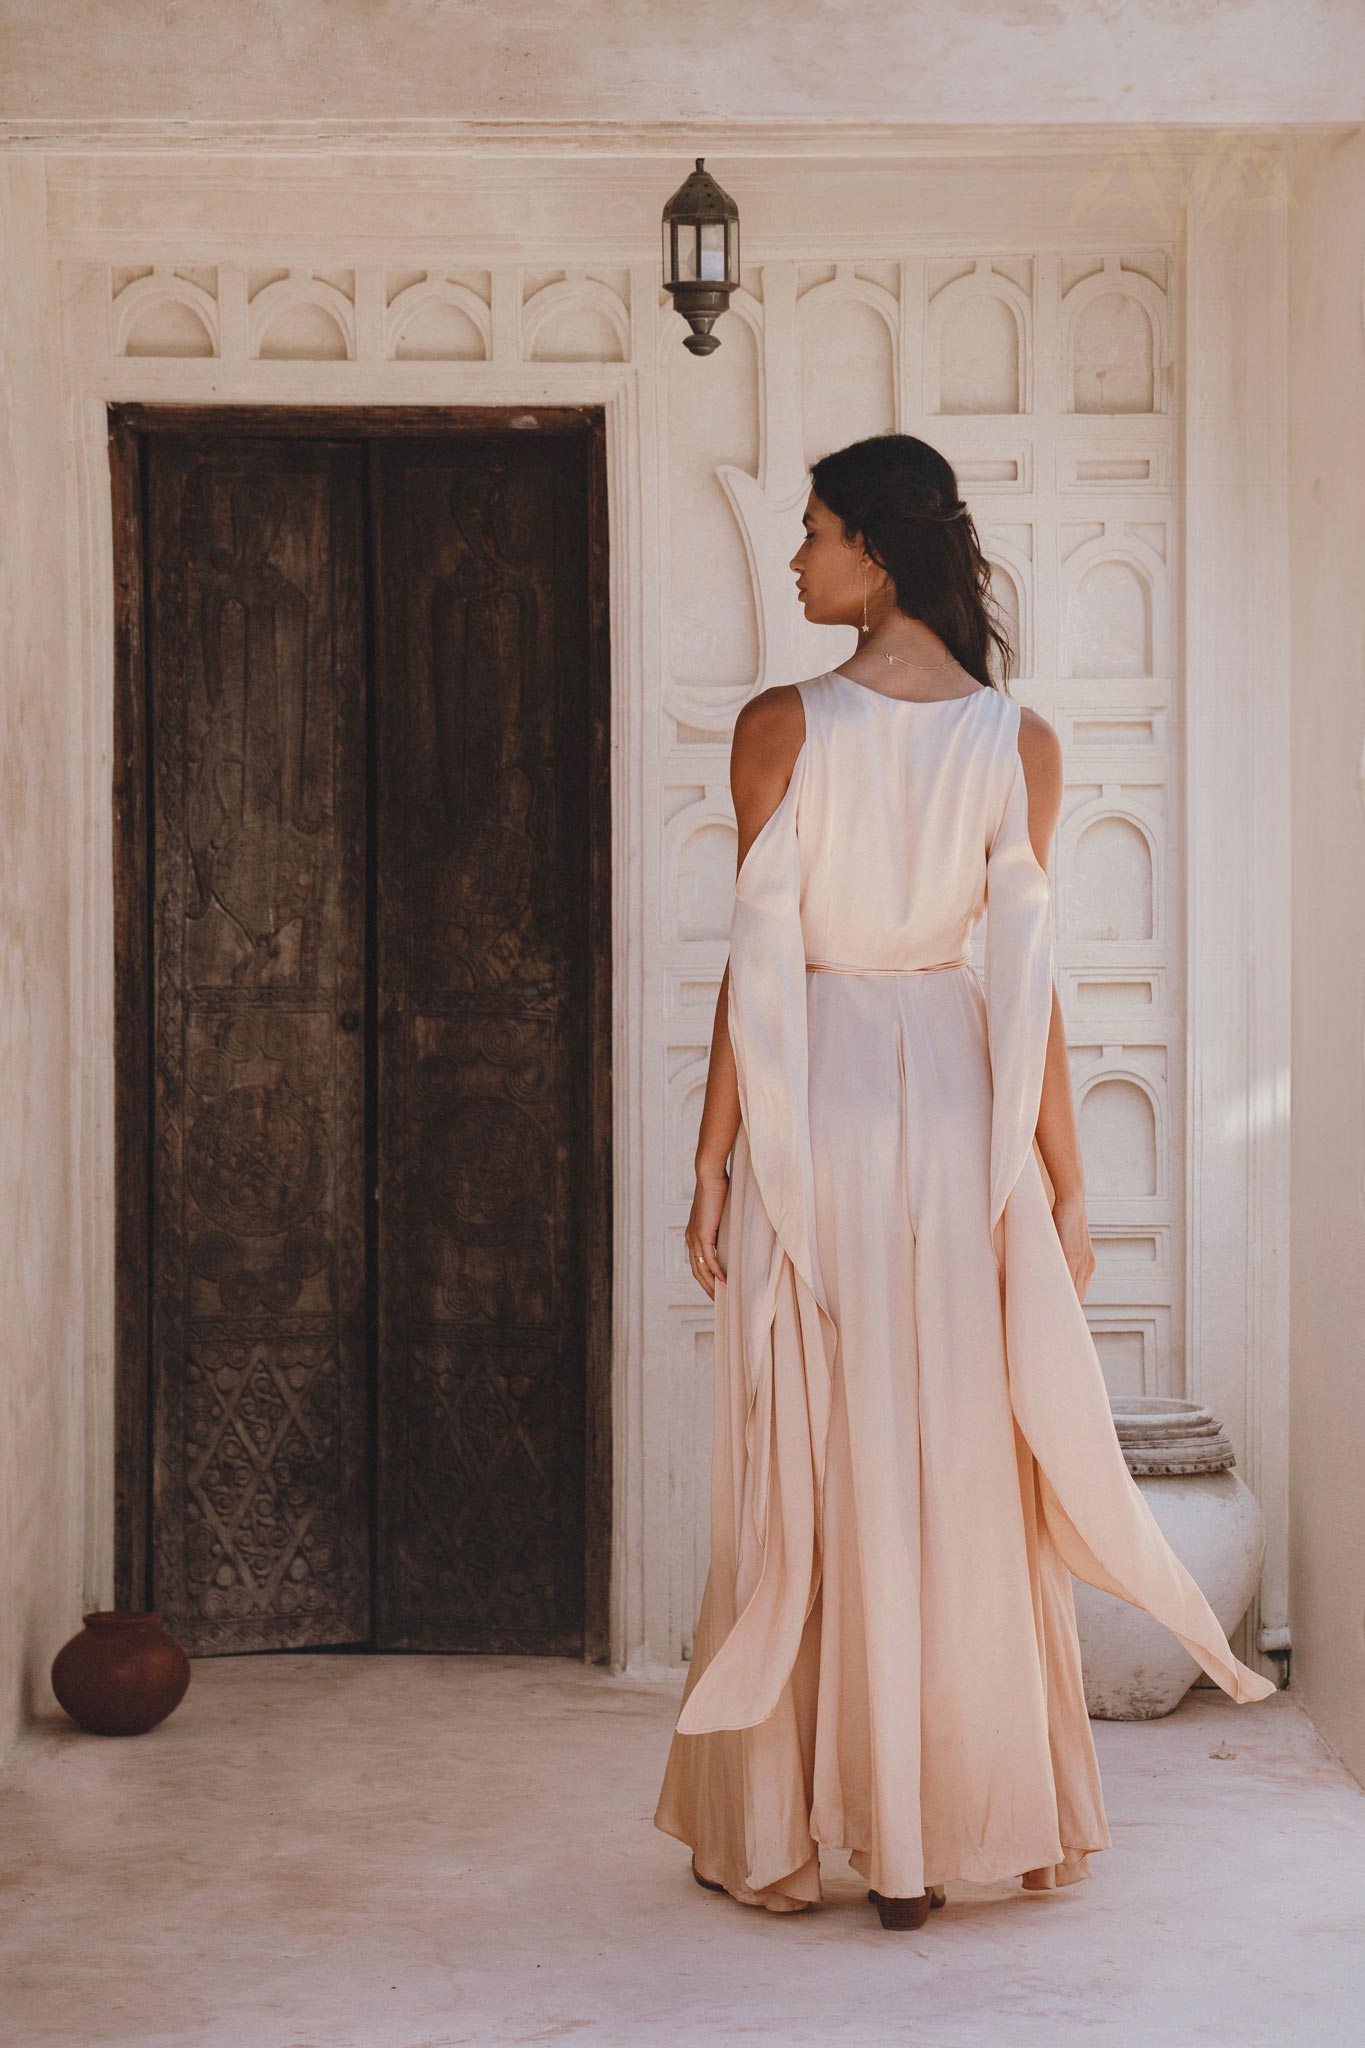 Organic Peace Silk Dress in Ombre Light Cream & Dusty Pink: Wrap Kimono Style with Maxi Bell Sleeves, Truly Feminine.